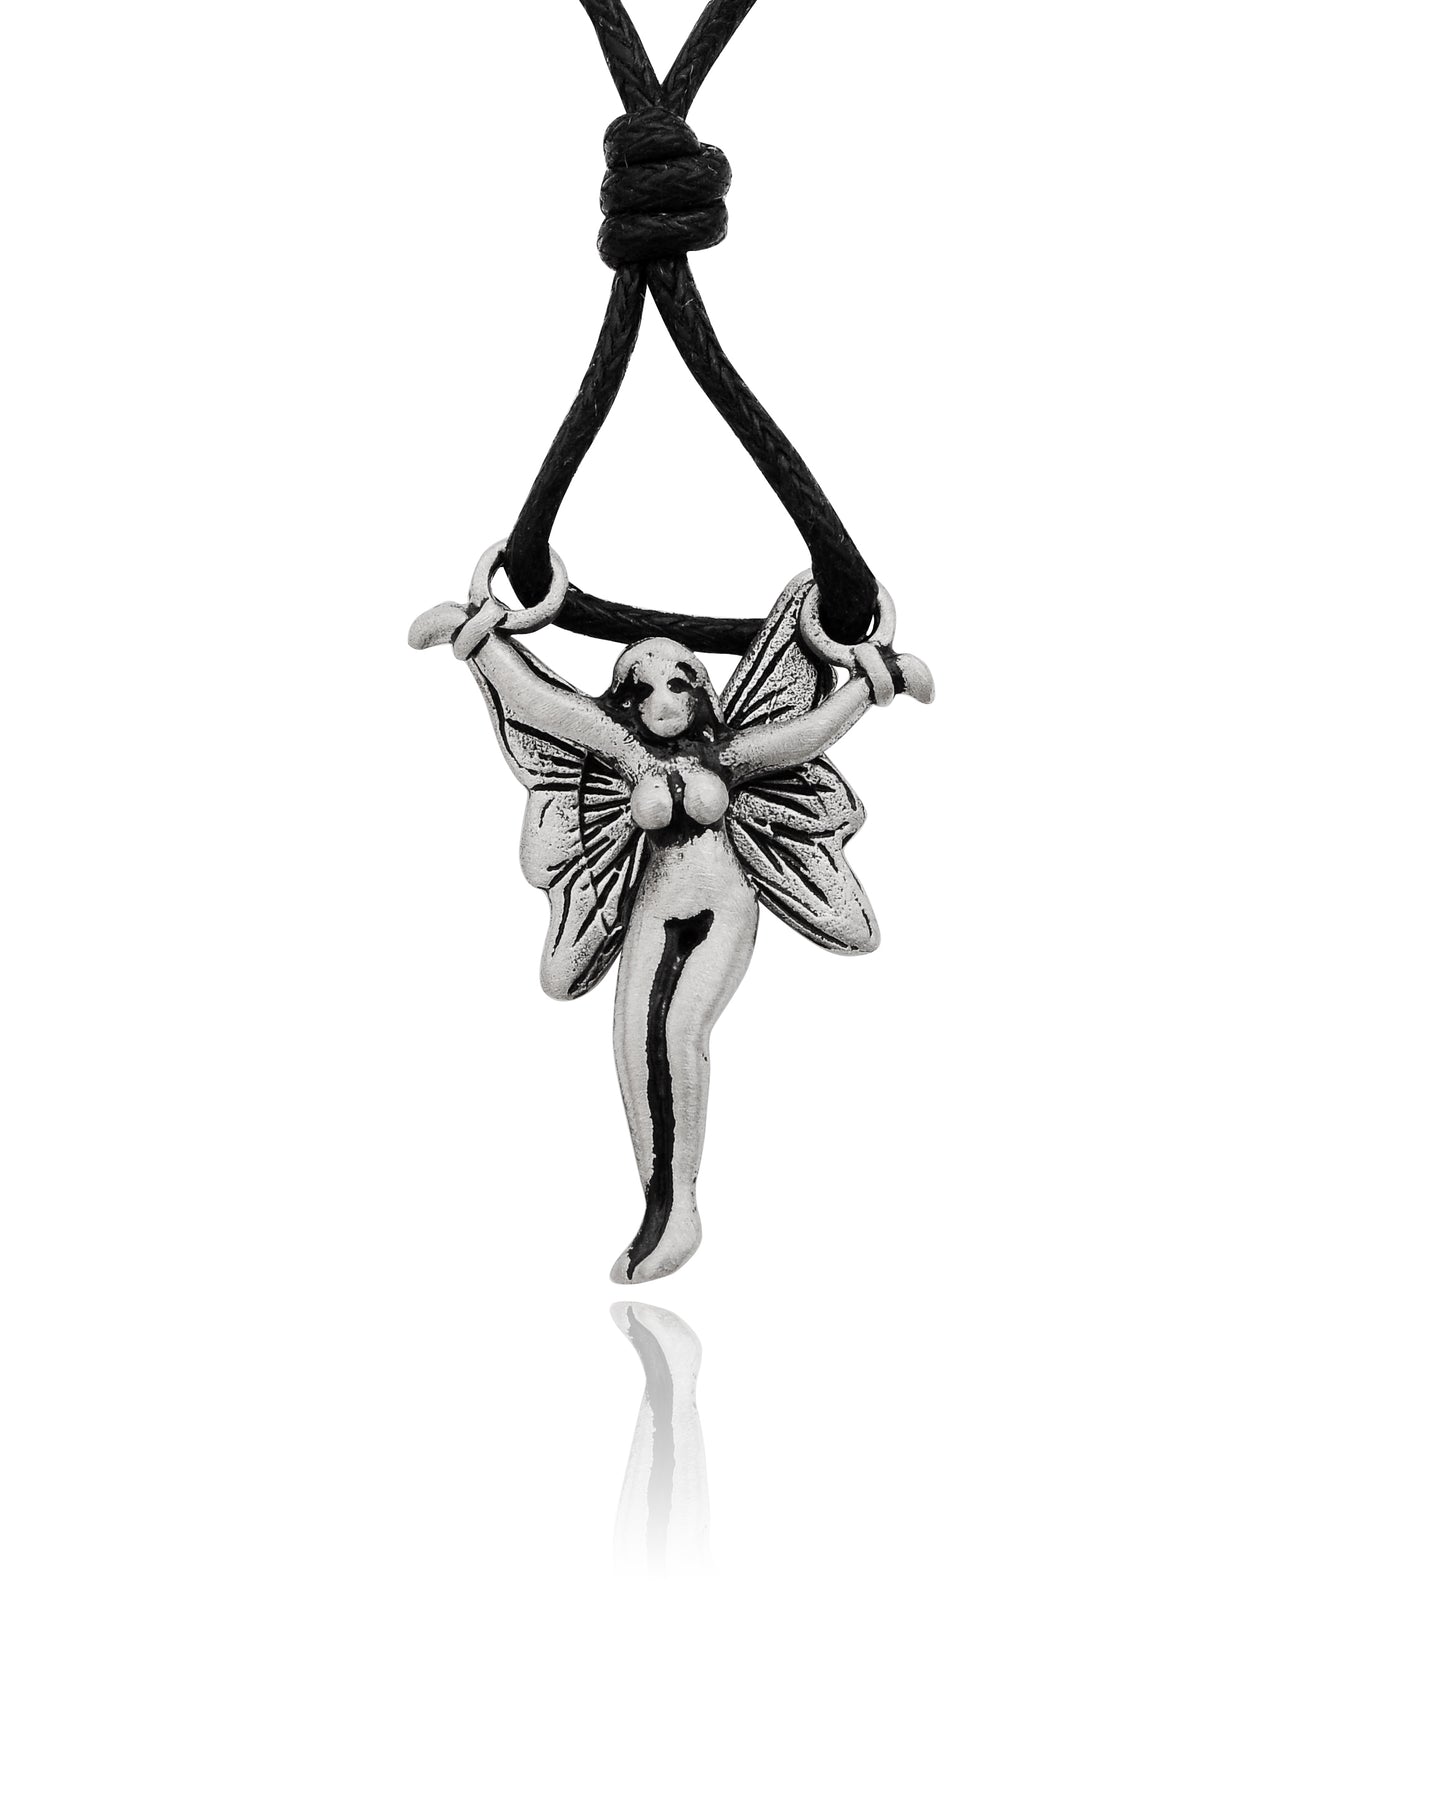 New Fairy Pixie Silver Pewter Charm Necklace Pendant Jewelry